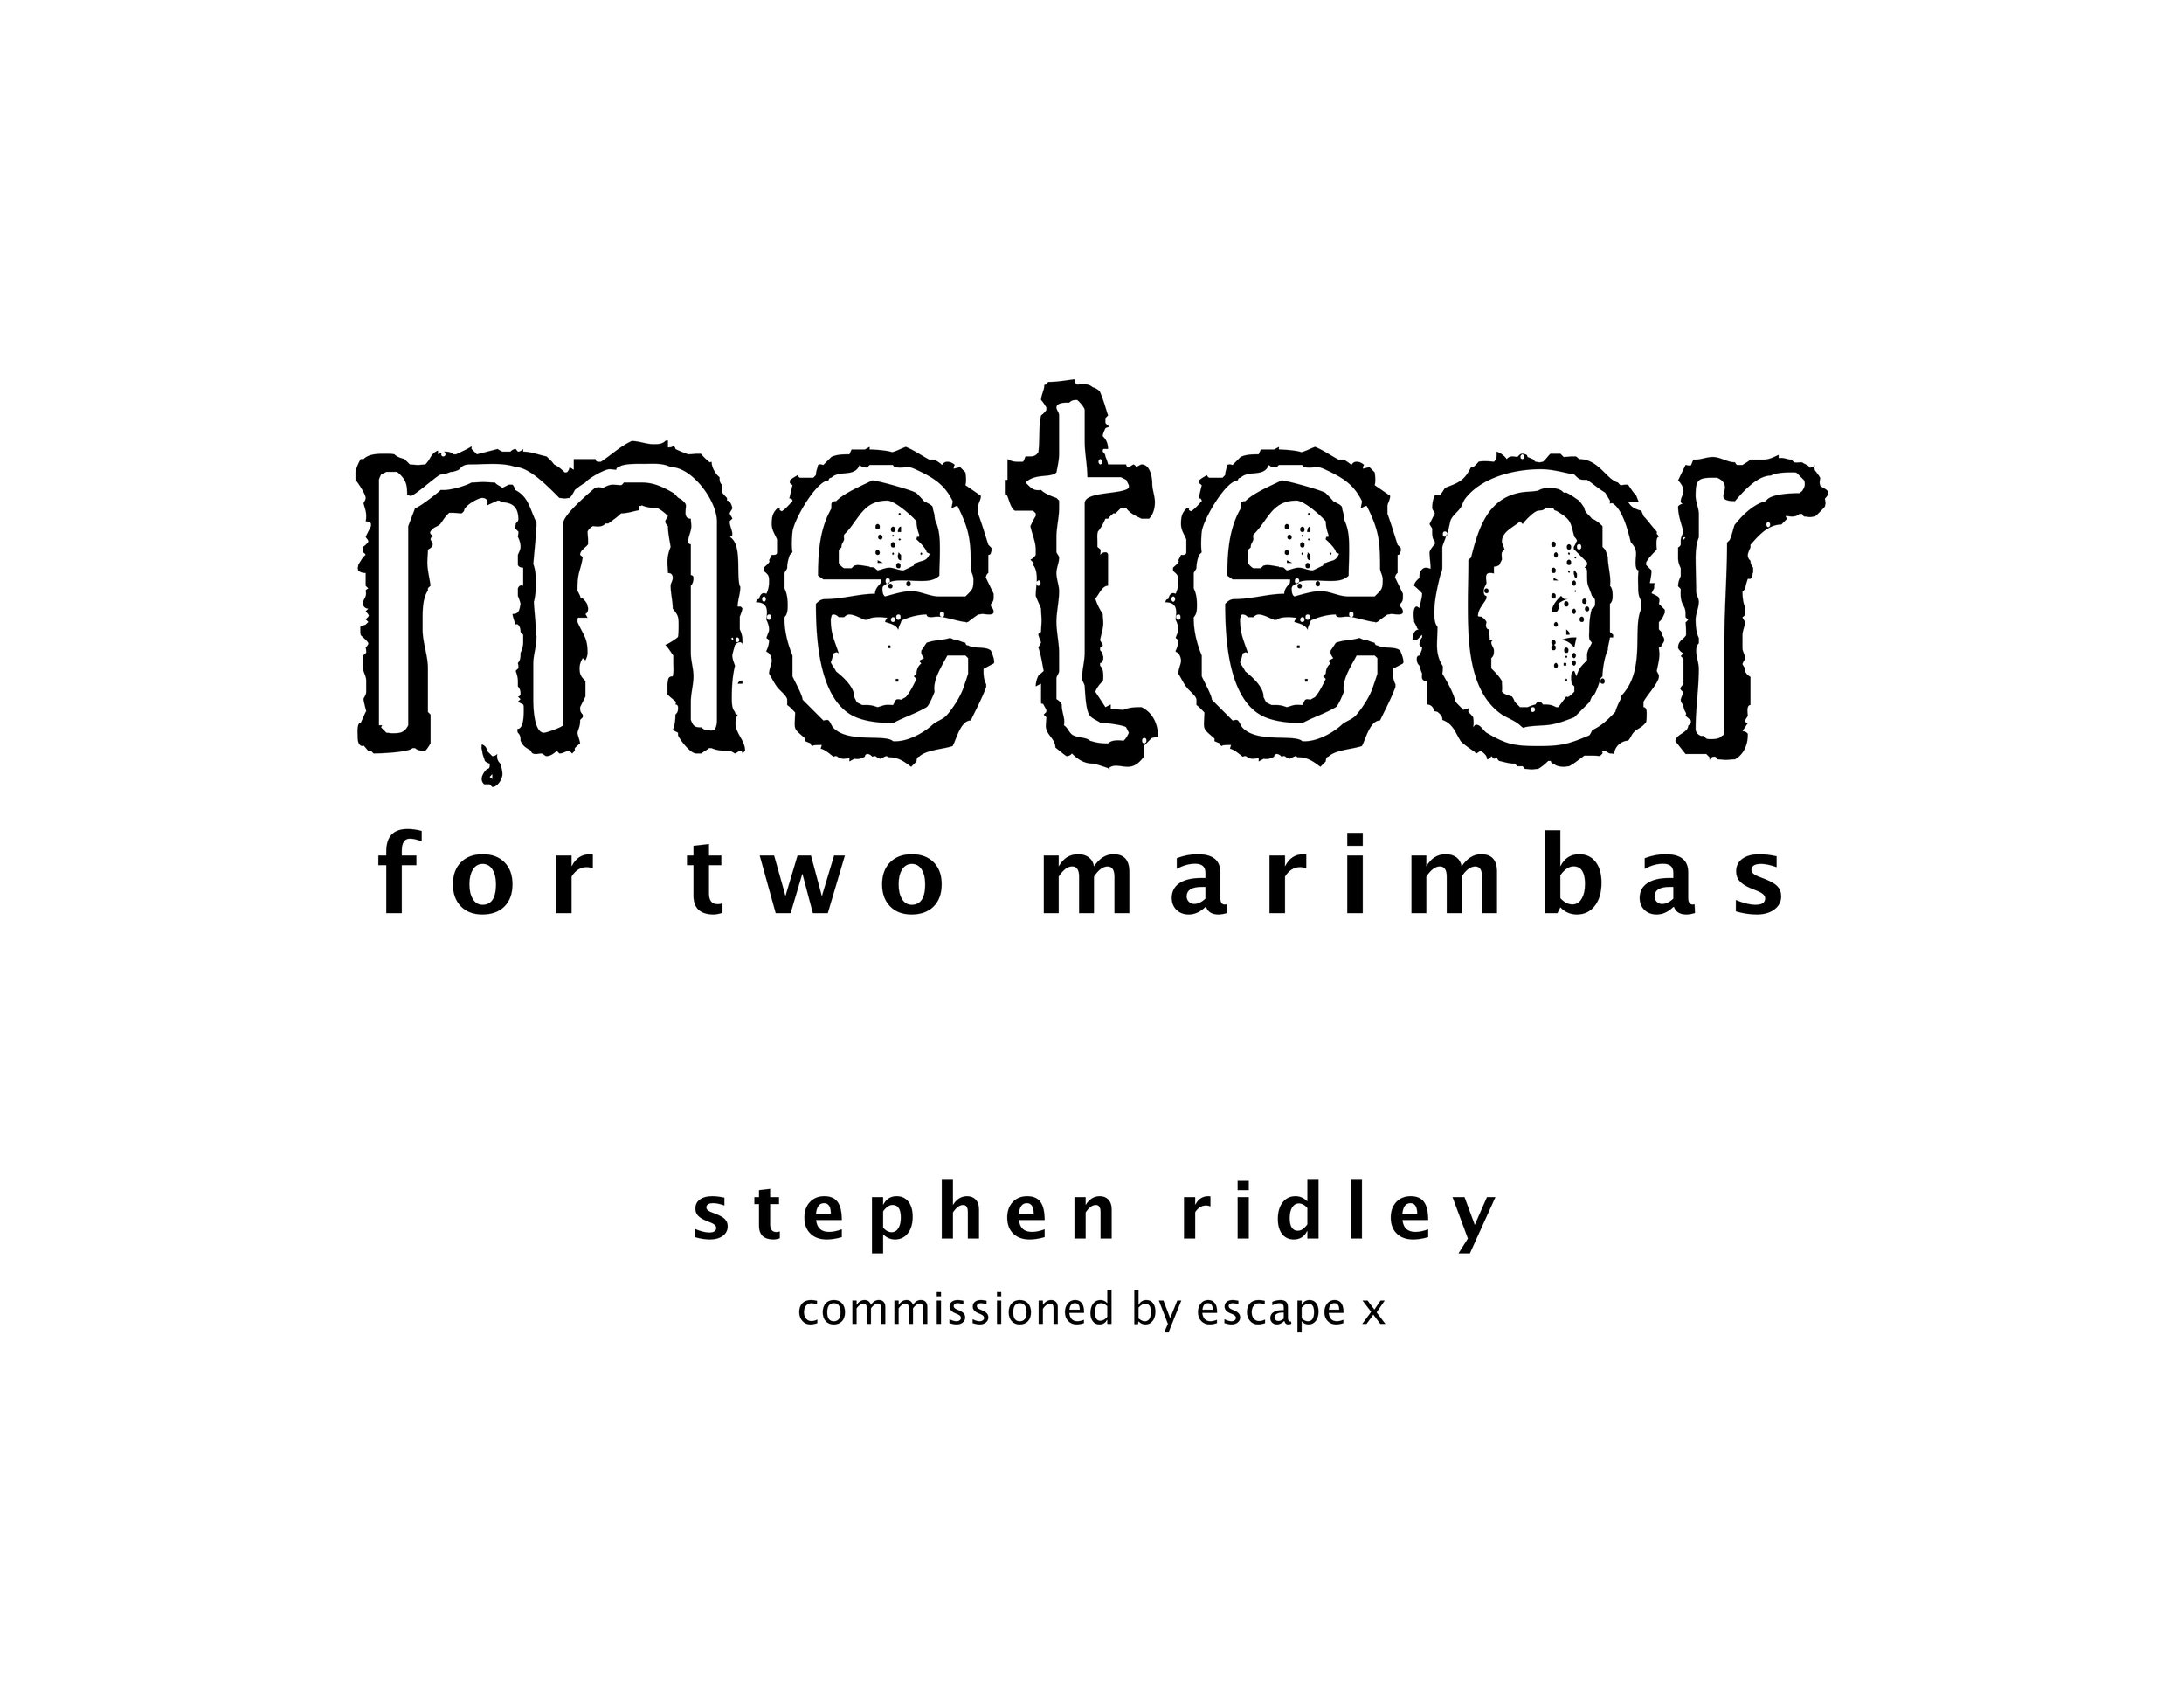 Stephen Ridley - Meteor for Two Marimbas